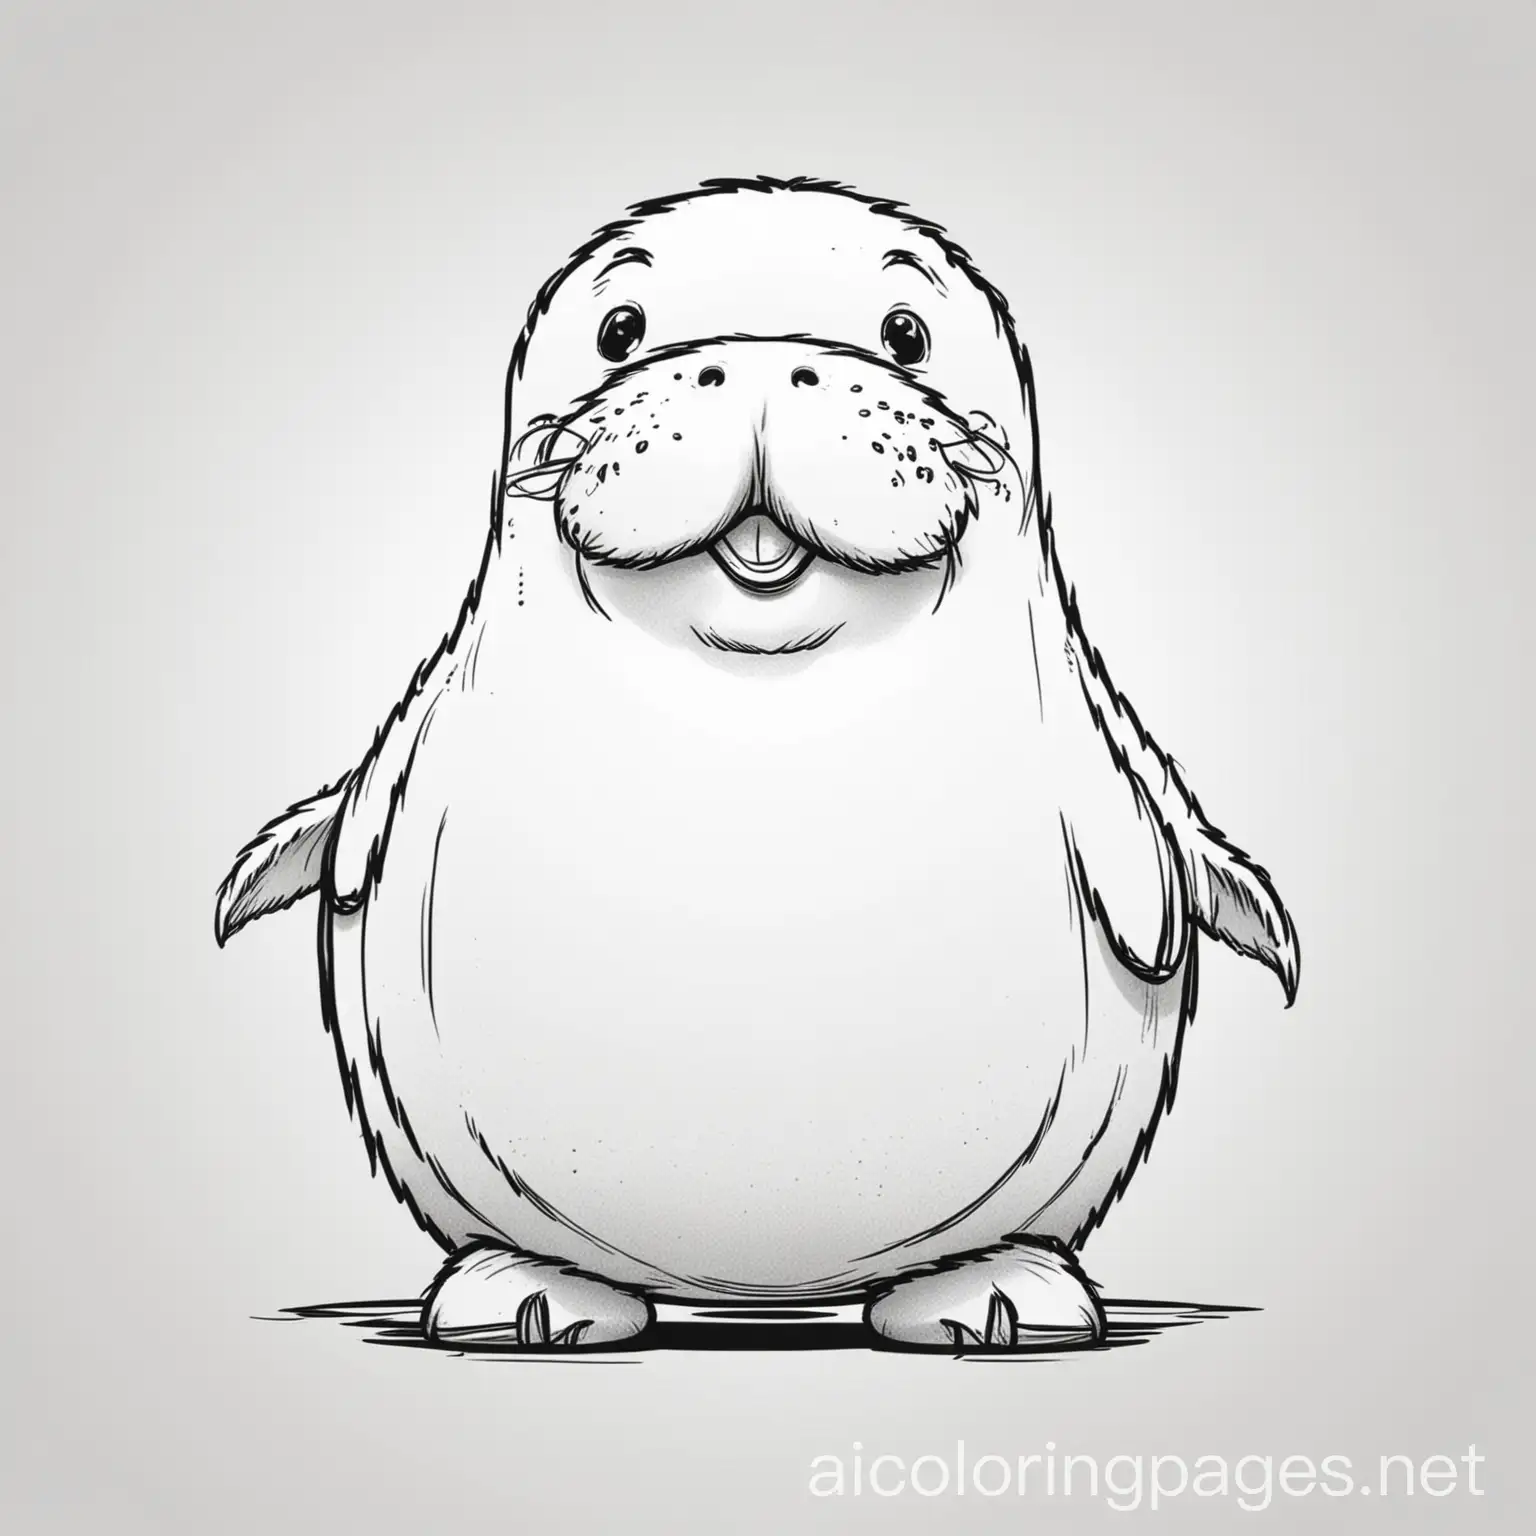 happy  , funny ,white, cute, full body cartoon walrus , Coloring Page, black and white, line art, white background, Simplicity, Ample White Space. The background of the coloring page is plain white to make it easy for young children to color within the lines. The outlines of all the subjects are easy to distinguish, making it simple for kids to color without too much difficulty